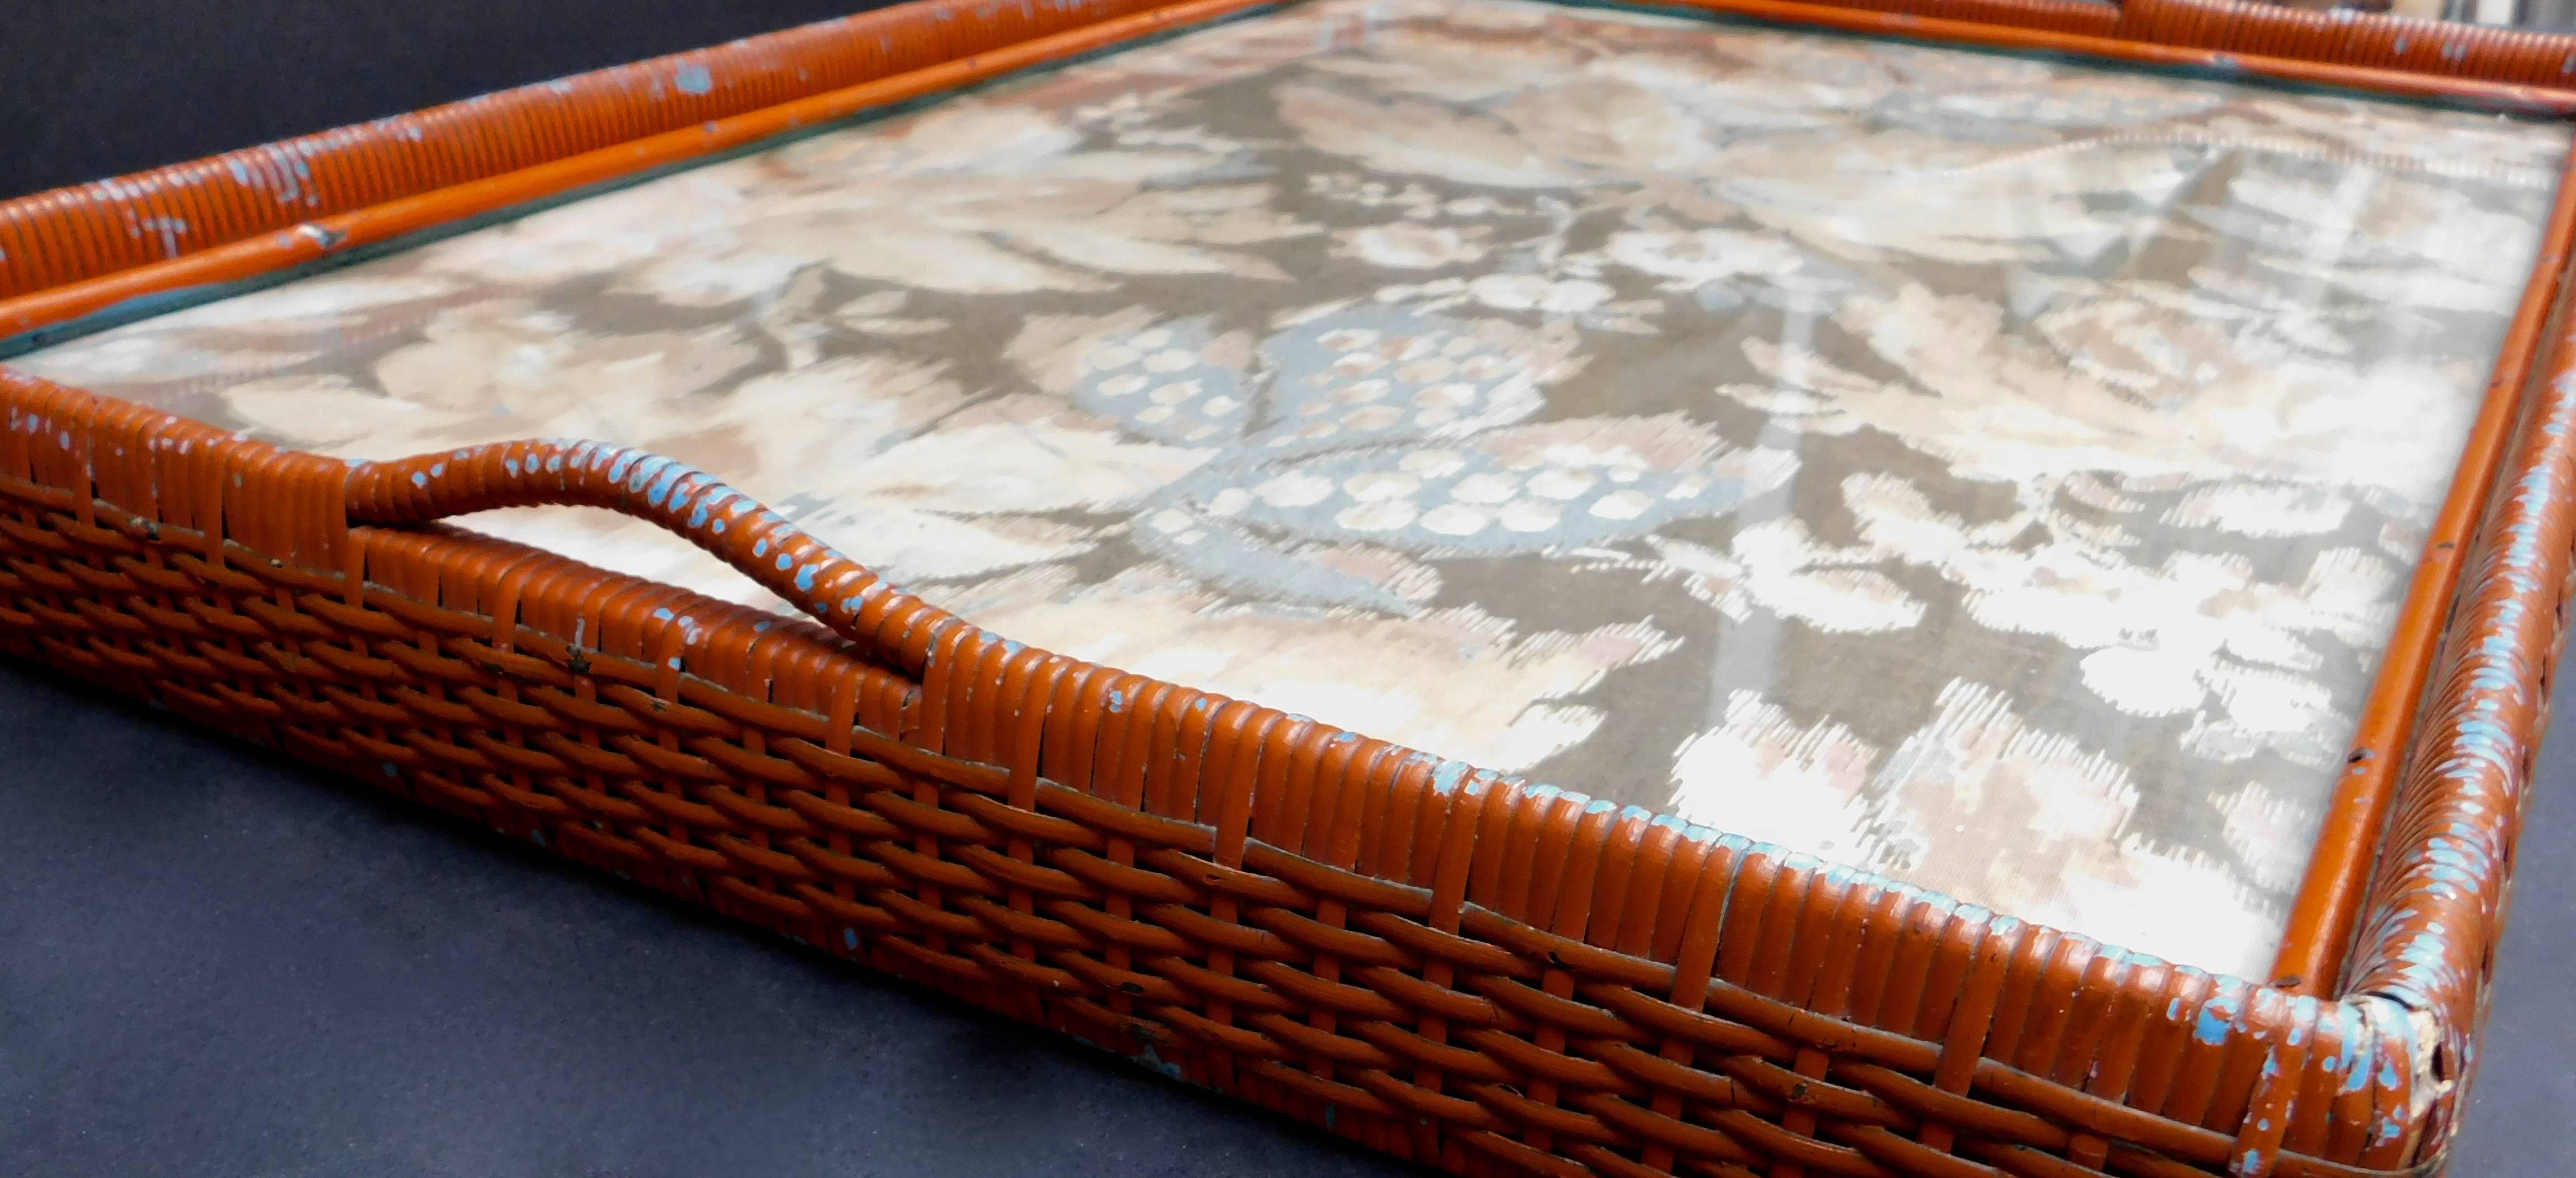 19th Century English Painted Wicker Tray with Original Ikat Textile under Glass For Sale 2